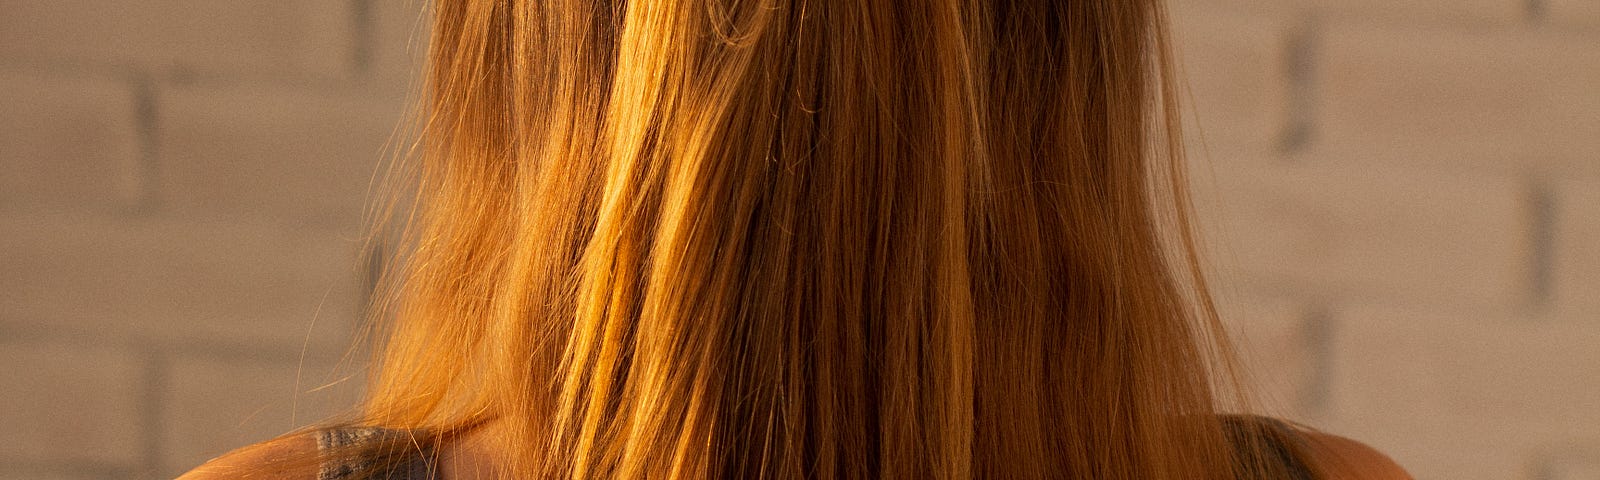 The back of the head of a woman with long reddish hair, standing straight, shoulders back, facing a whit brick wall.